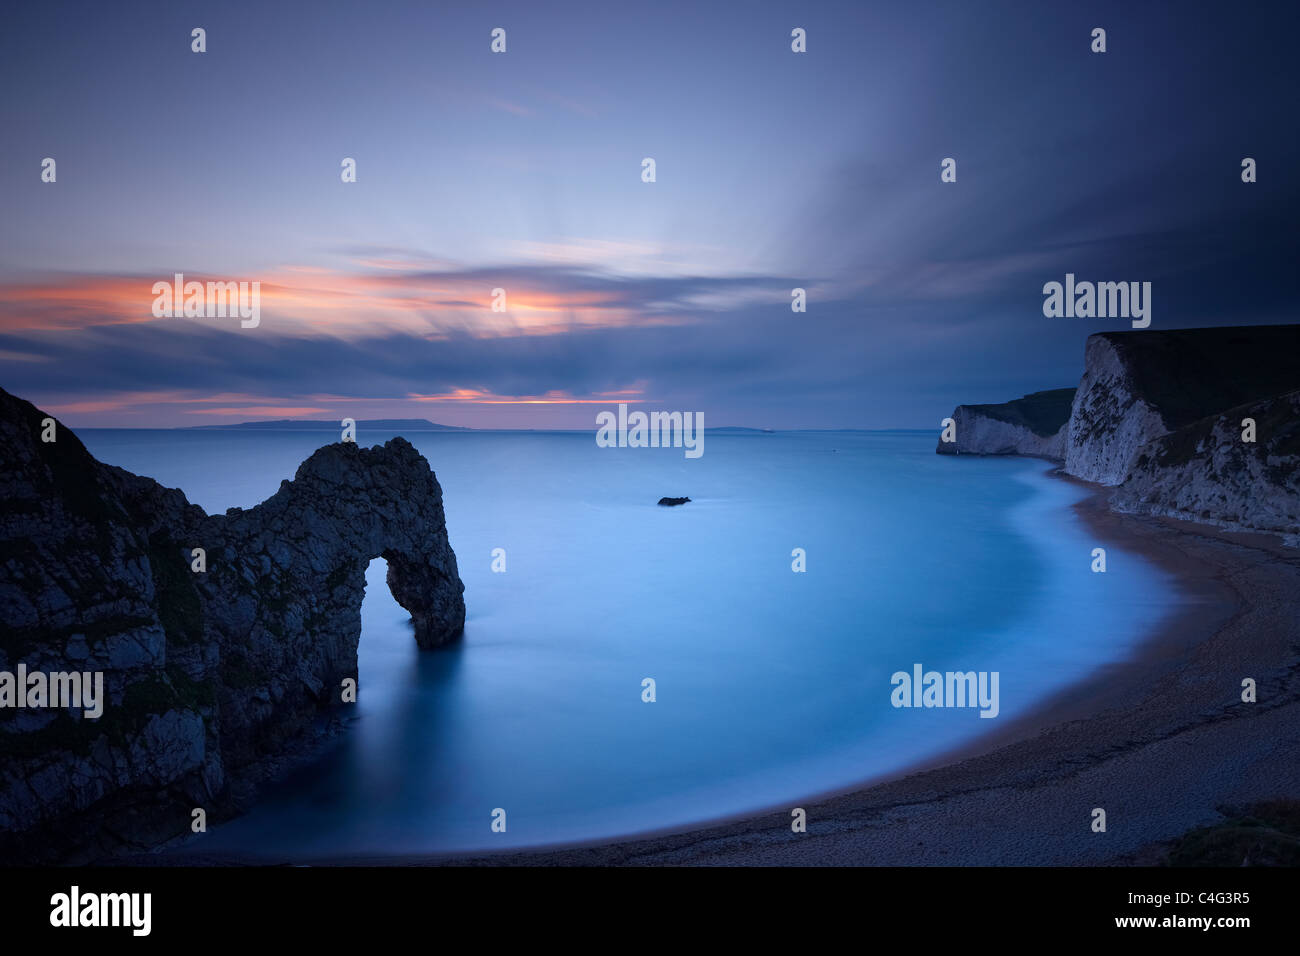 Durdle Door and the Jurassic Coast at dusk, with Weymouth Bay & Portland beyond, Dorset, England Stock Photo